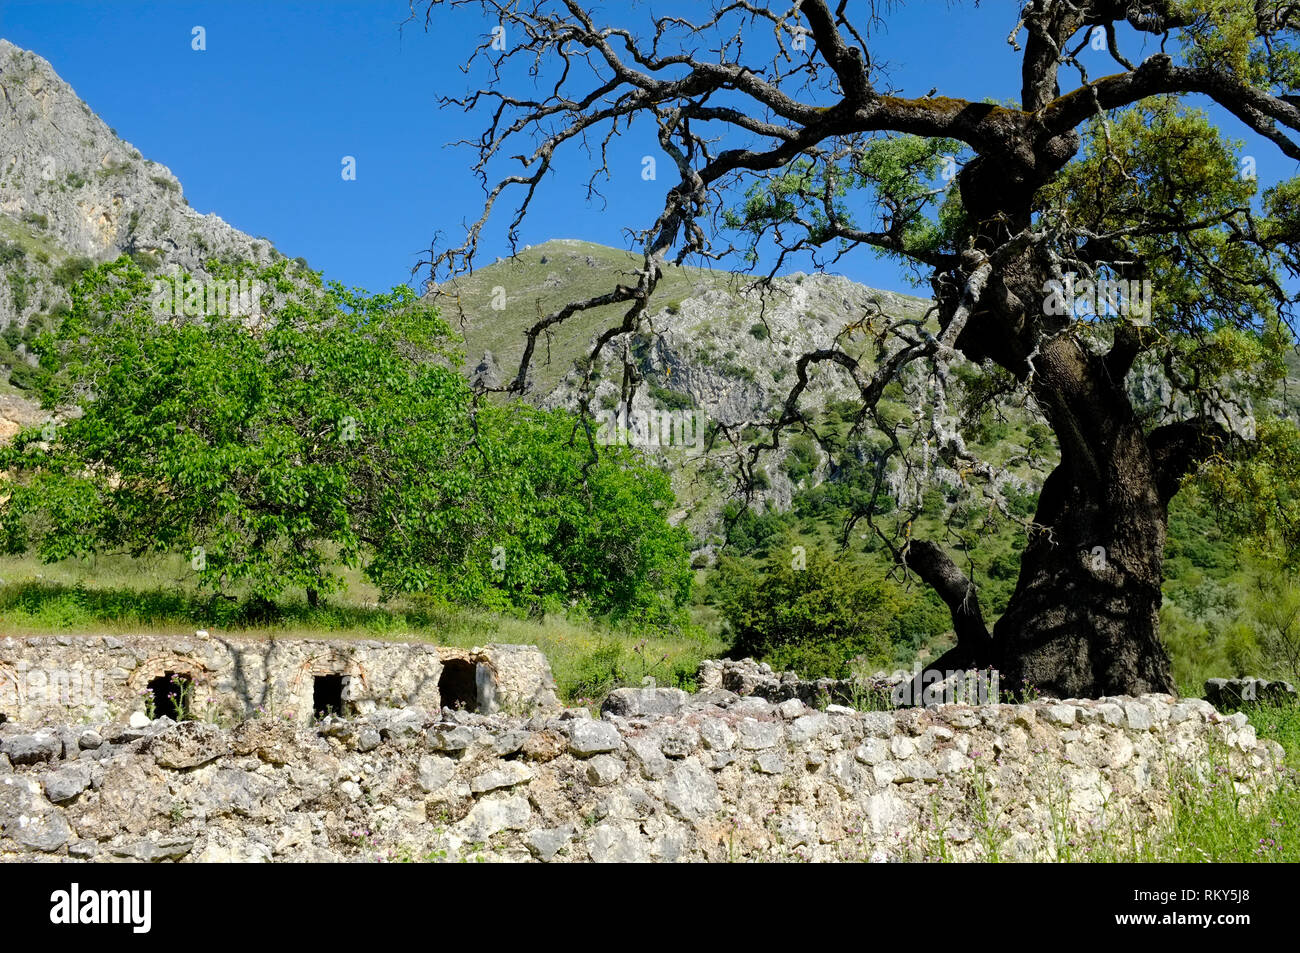 A view of a traditional stone animal shelter and compound in the mountains of the Sierra Subbetica, Cordoba Province, Andalucia, Spain. Stock Photo